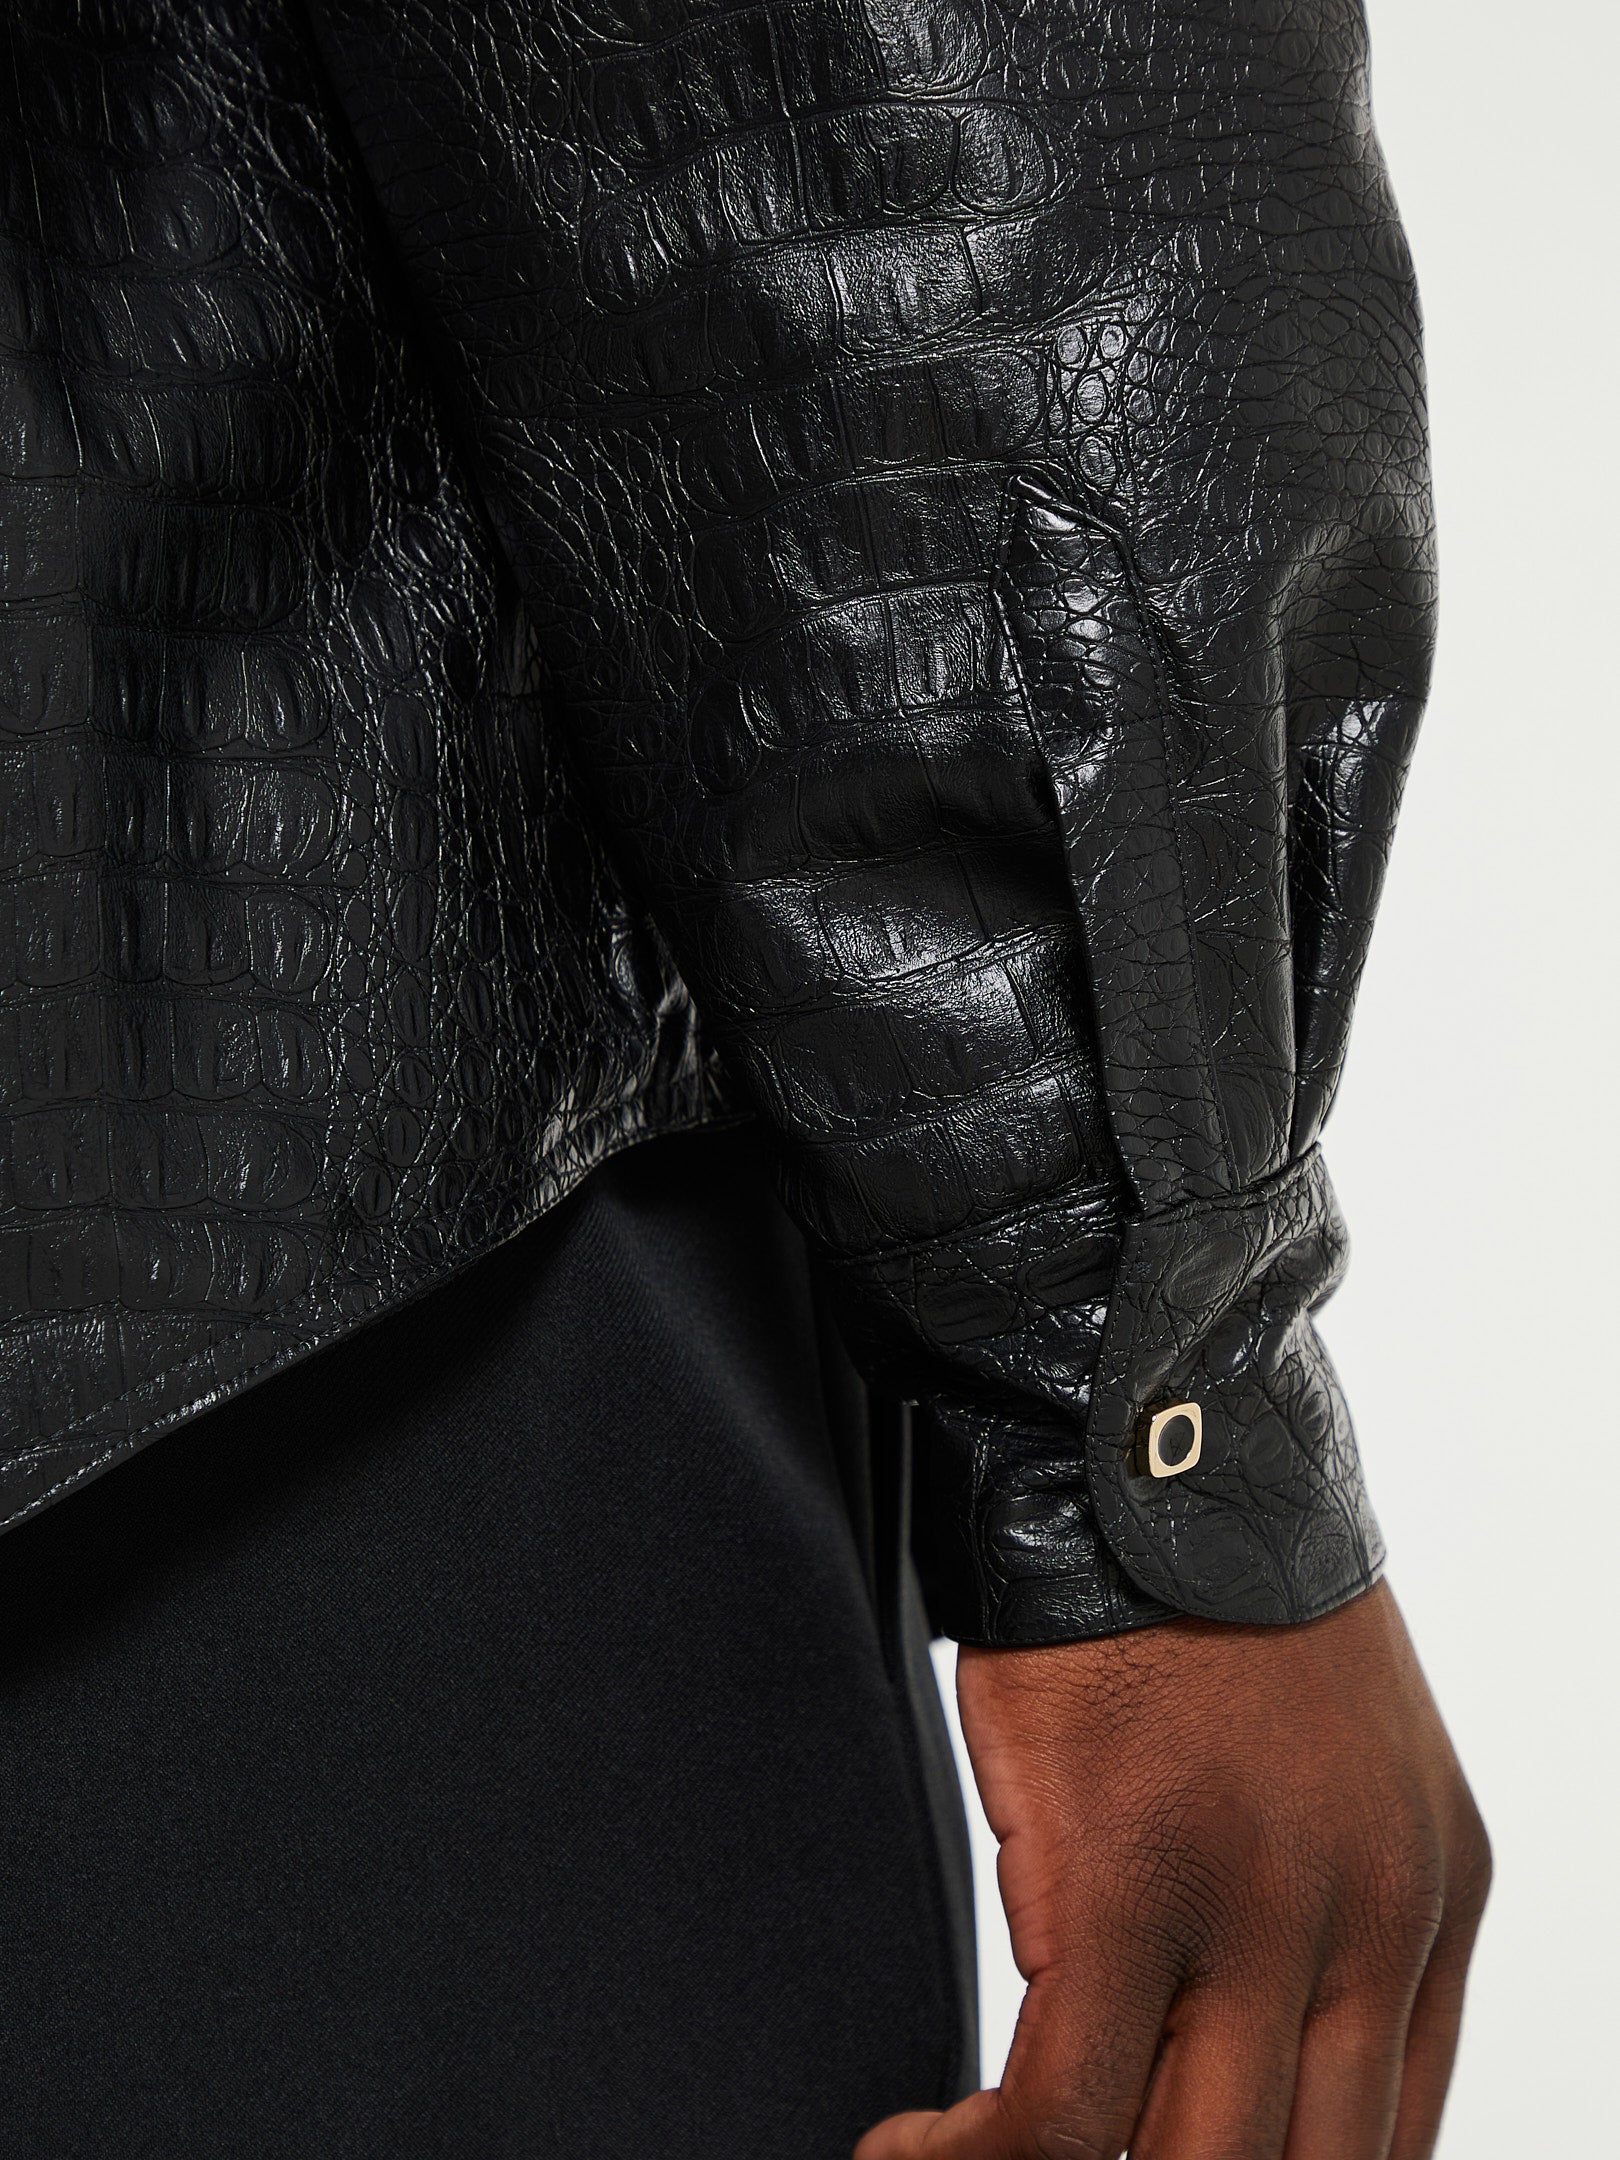 – - Black stoy 4SDesigns in Quilted Jacket Shirt